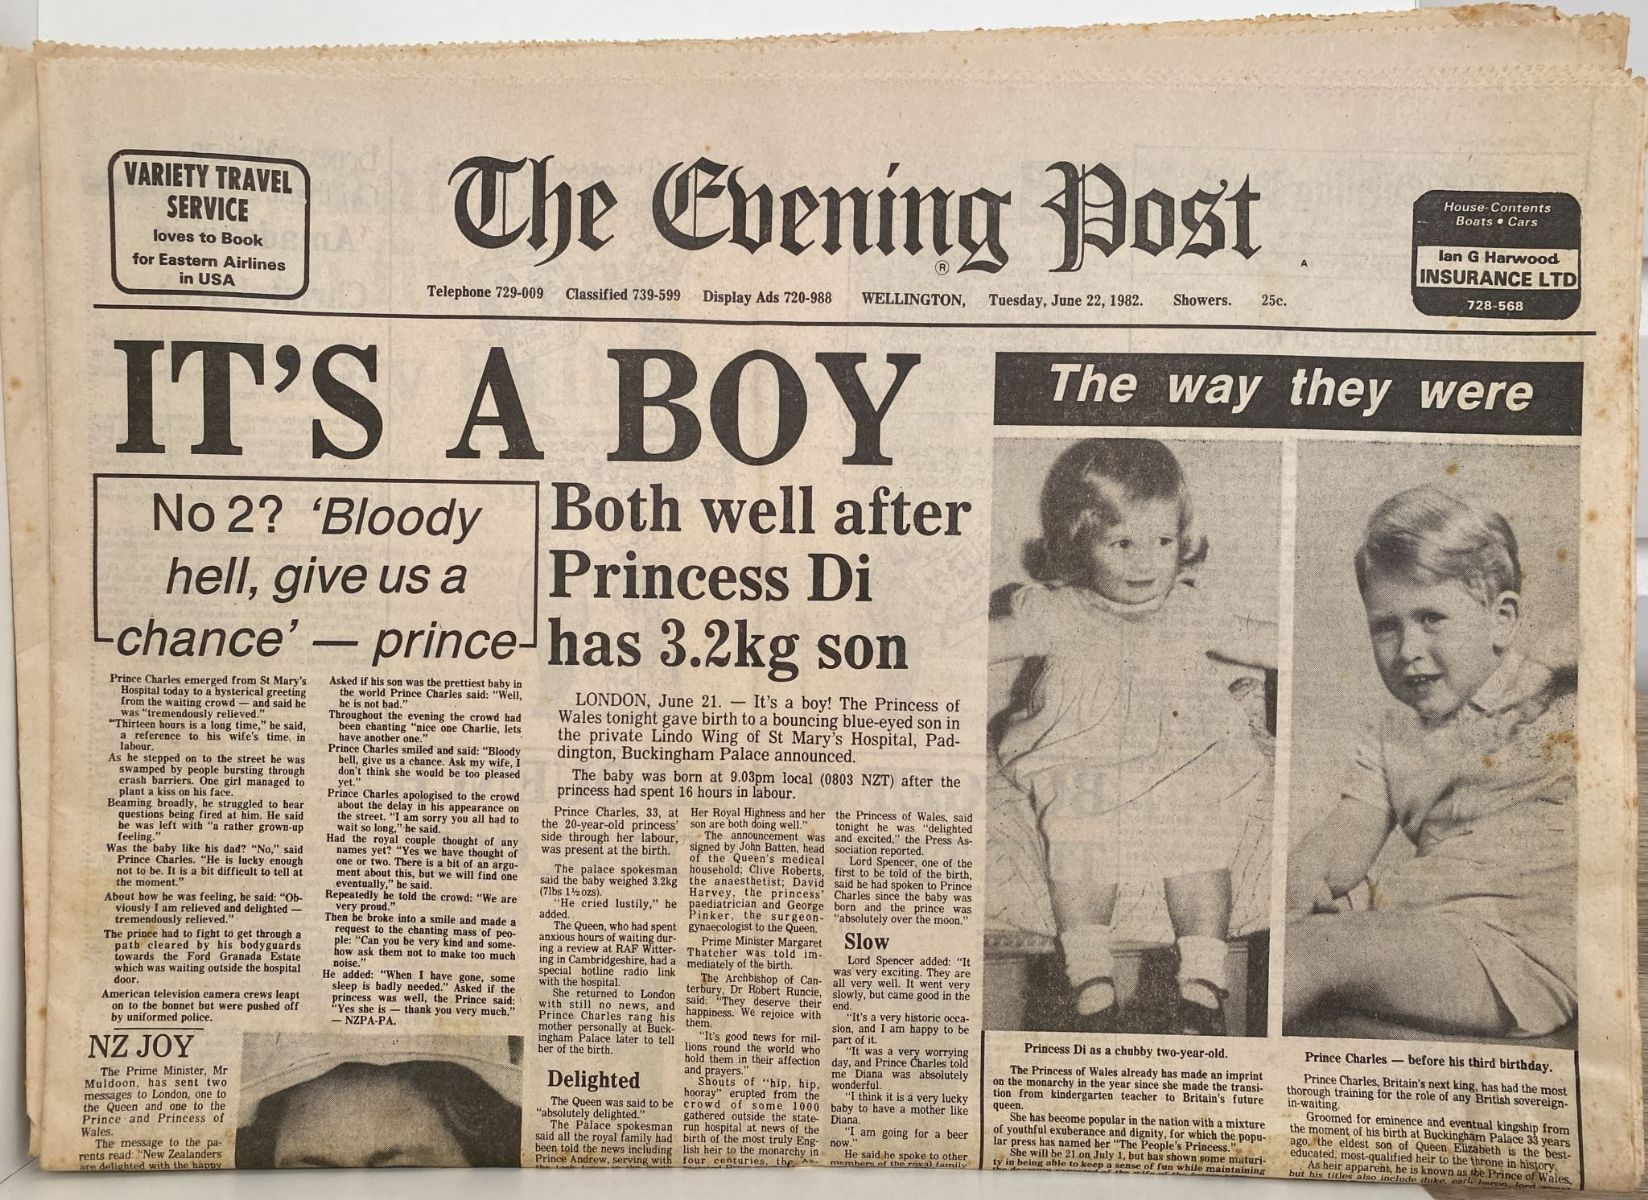 OLD NEWSPAPER: The Evening Post, 22nd June 1982 - Prince William born